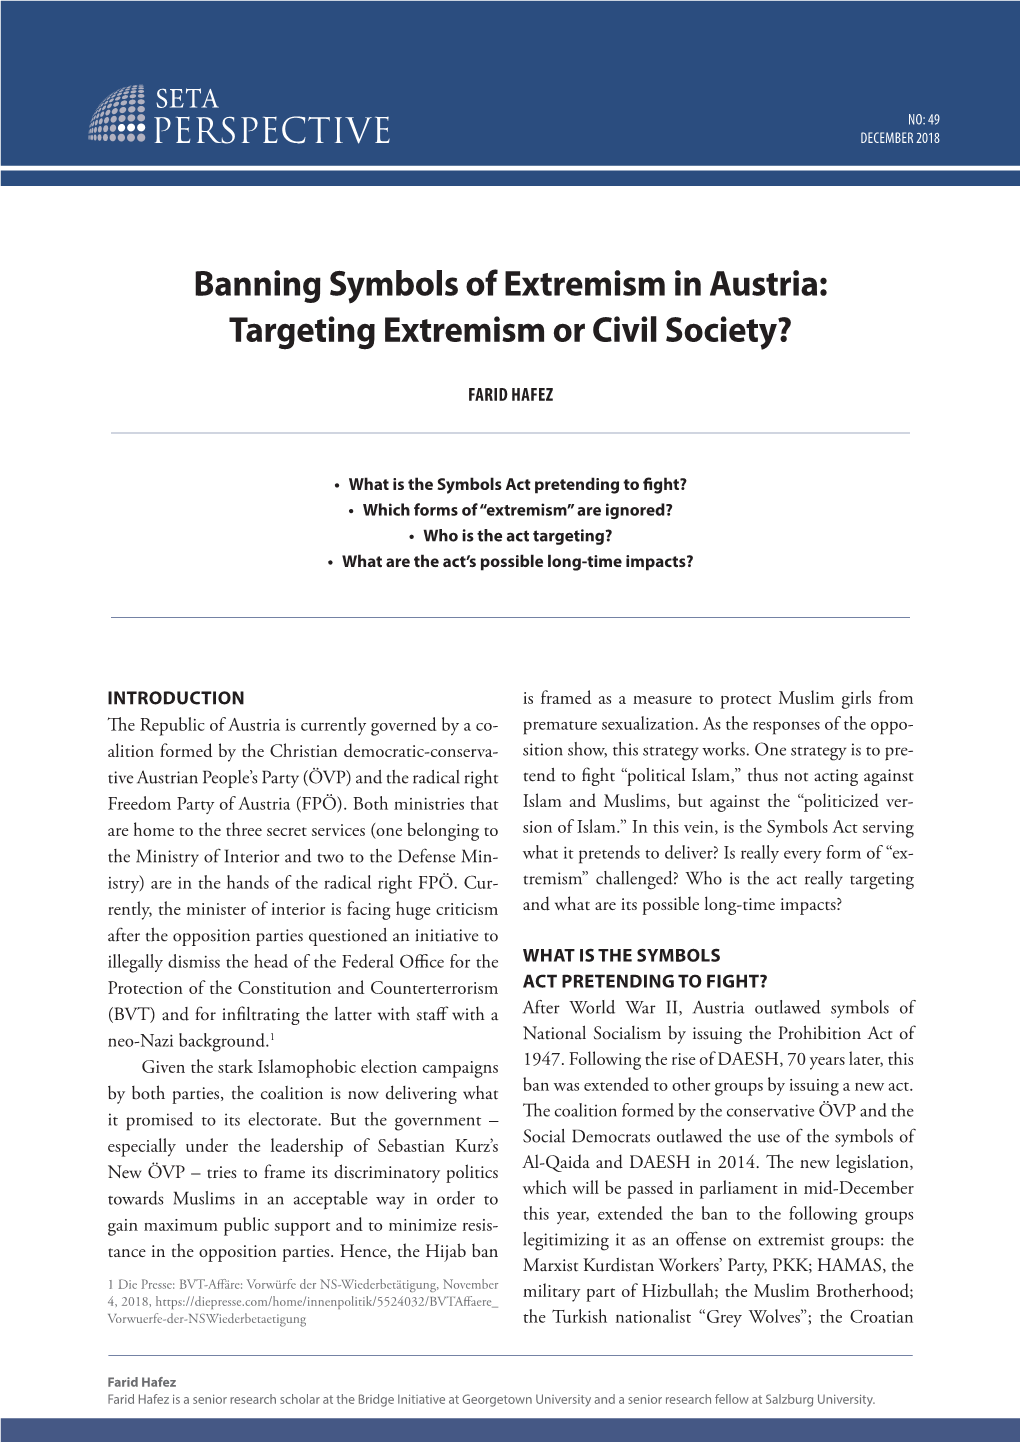 Banning Symbols of Extremism in Austria: Targeting Extremism Or Civil Society?